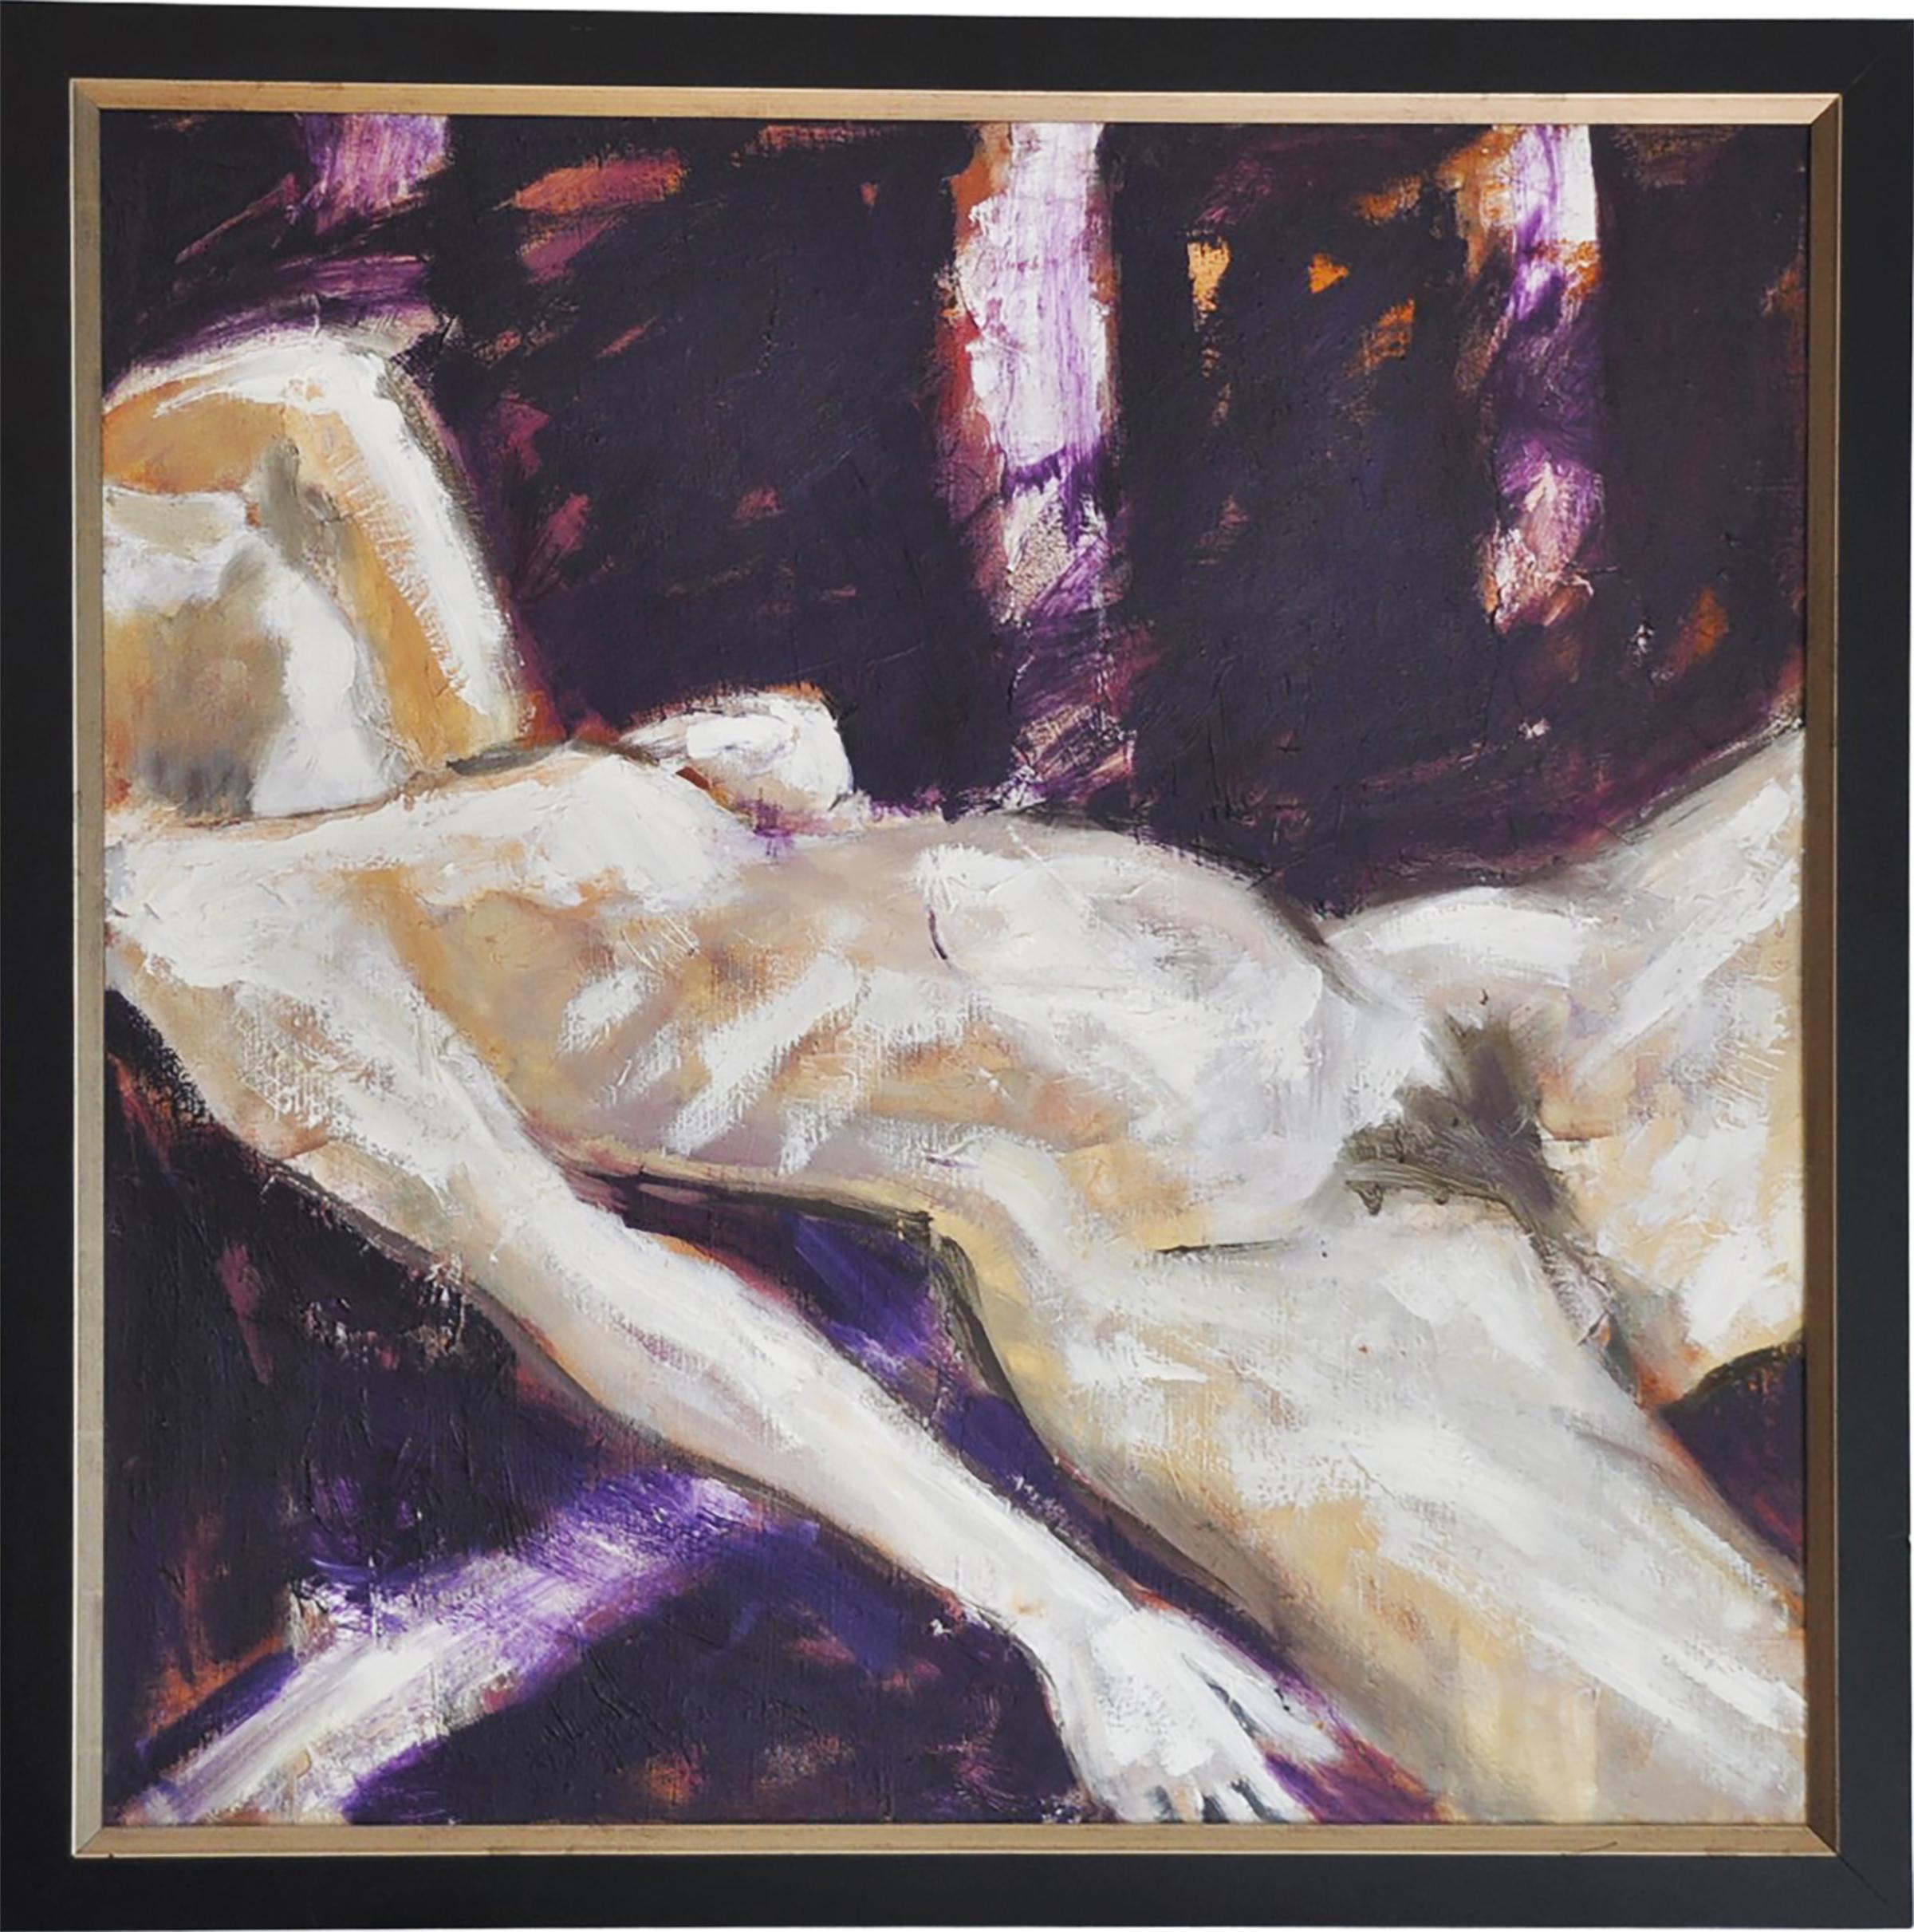 "Sleep II" by contemporary Romanian painter Marcel Lupse is an expressionist oil on canvas representing a reclining nude.

Marcel Lupse, born in 1954 is a well established contemporary Romanian painter with well over 100 group and personal